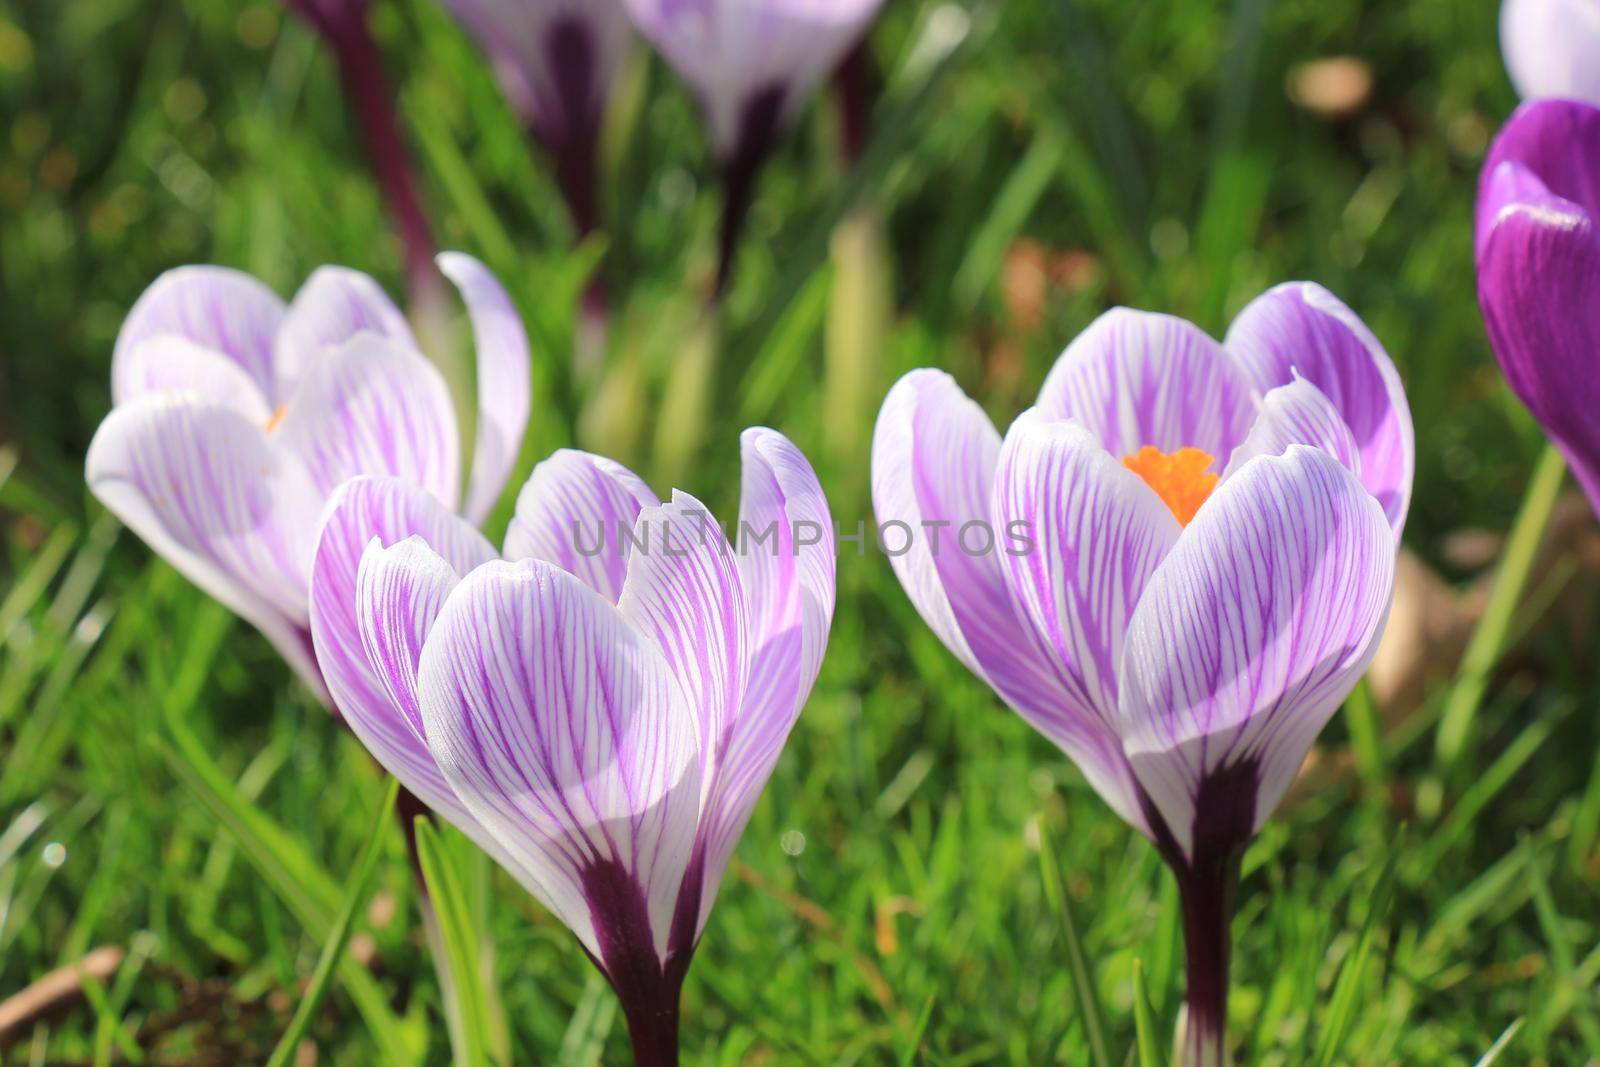 Purple and white crocuses on a field